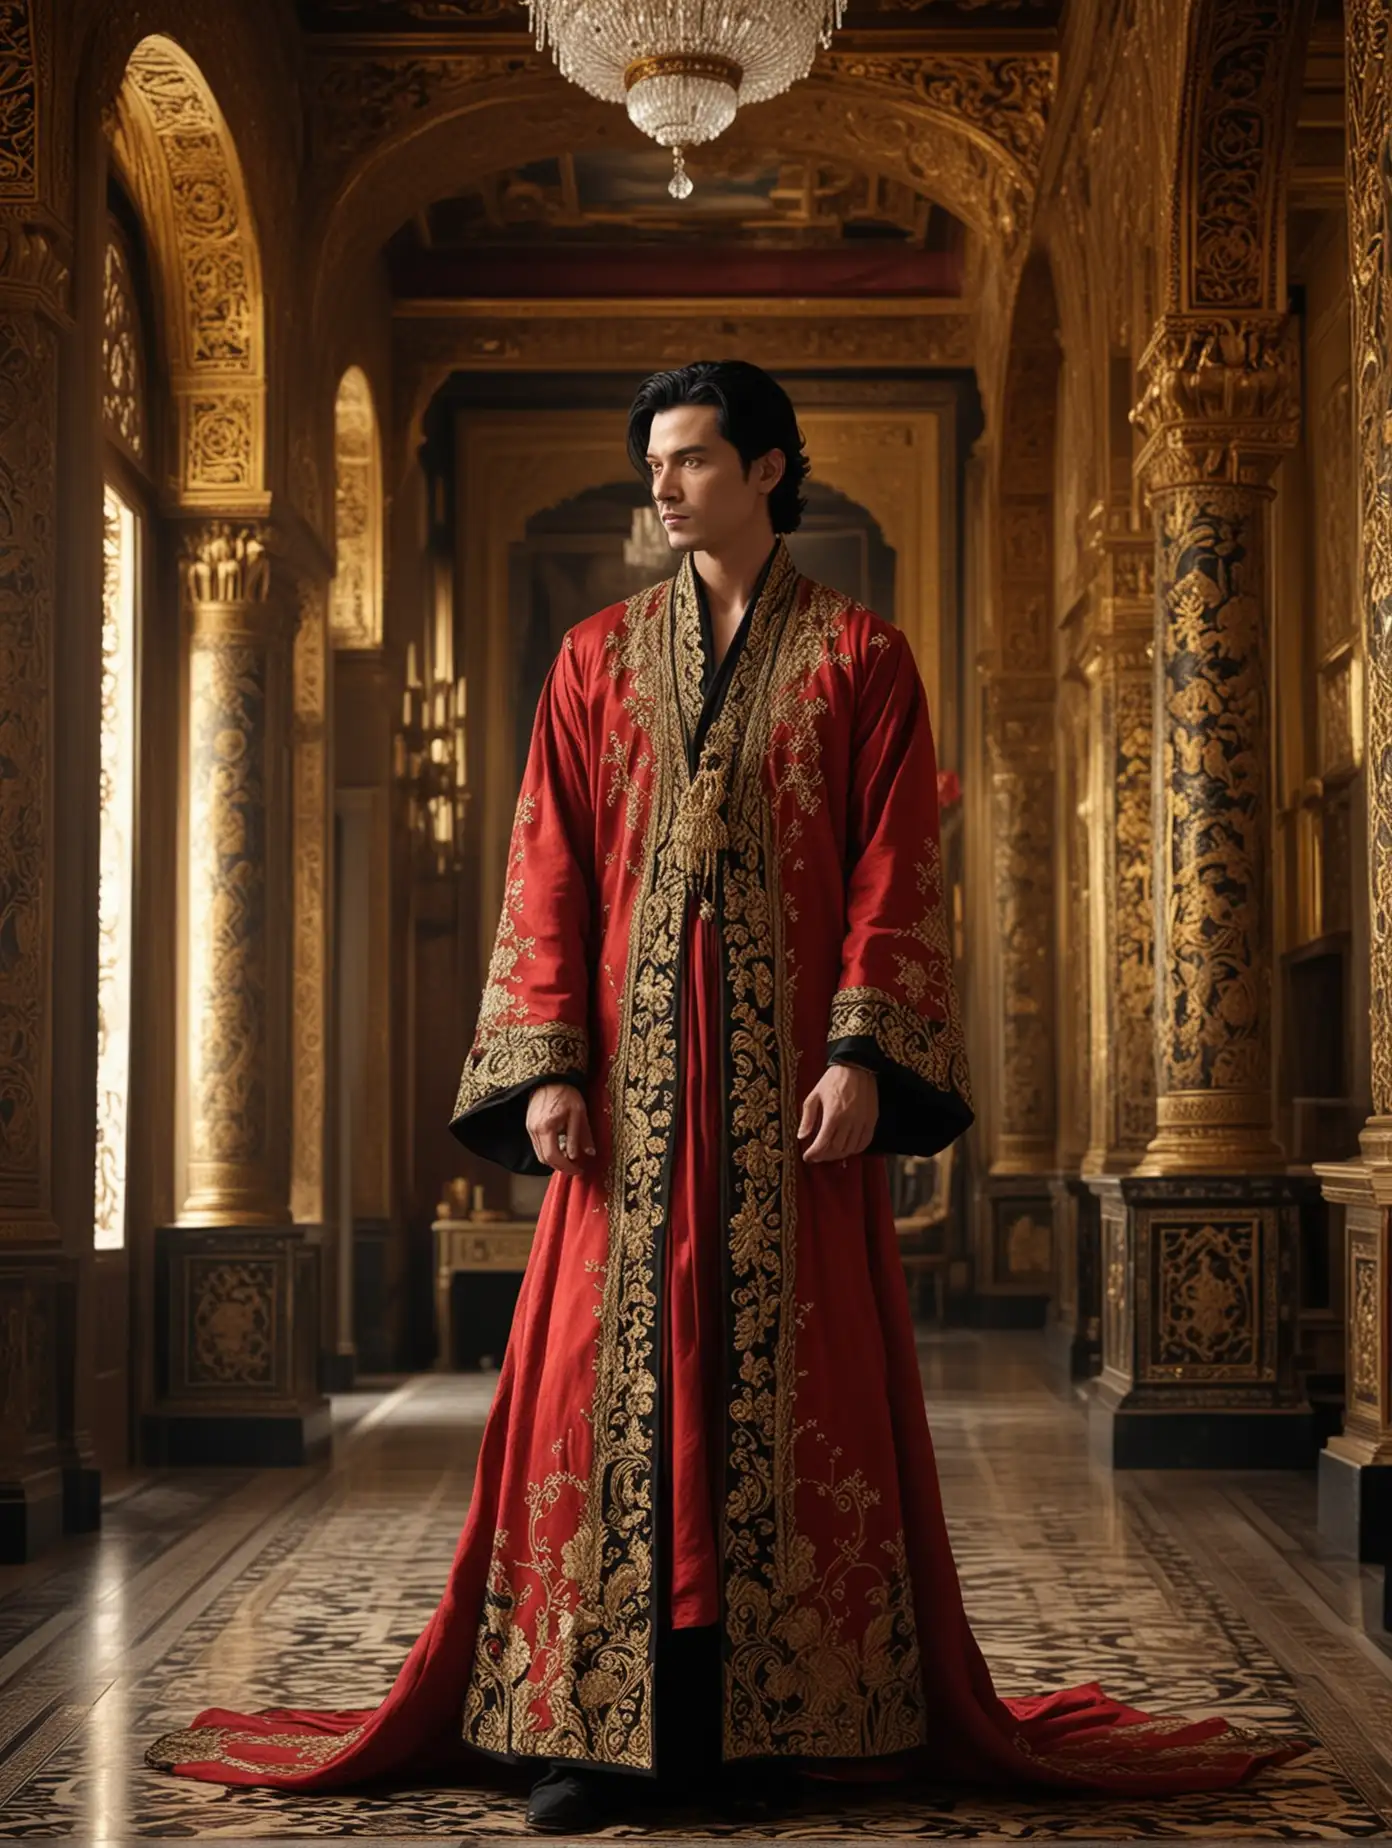 Masculine Man in Red Robe in Golden Palace